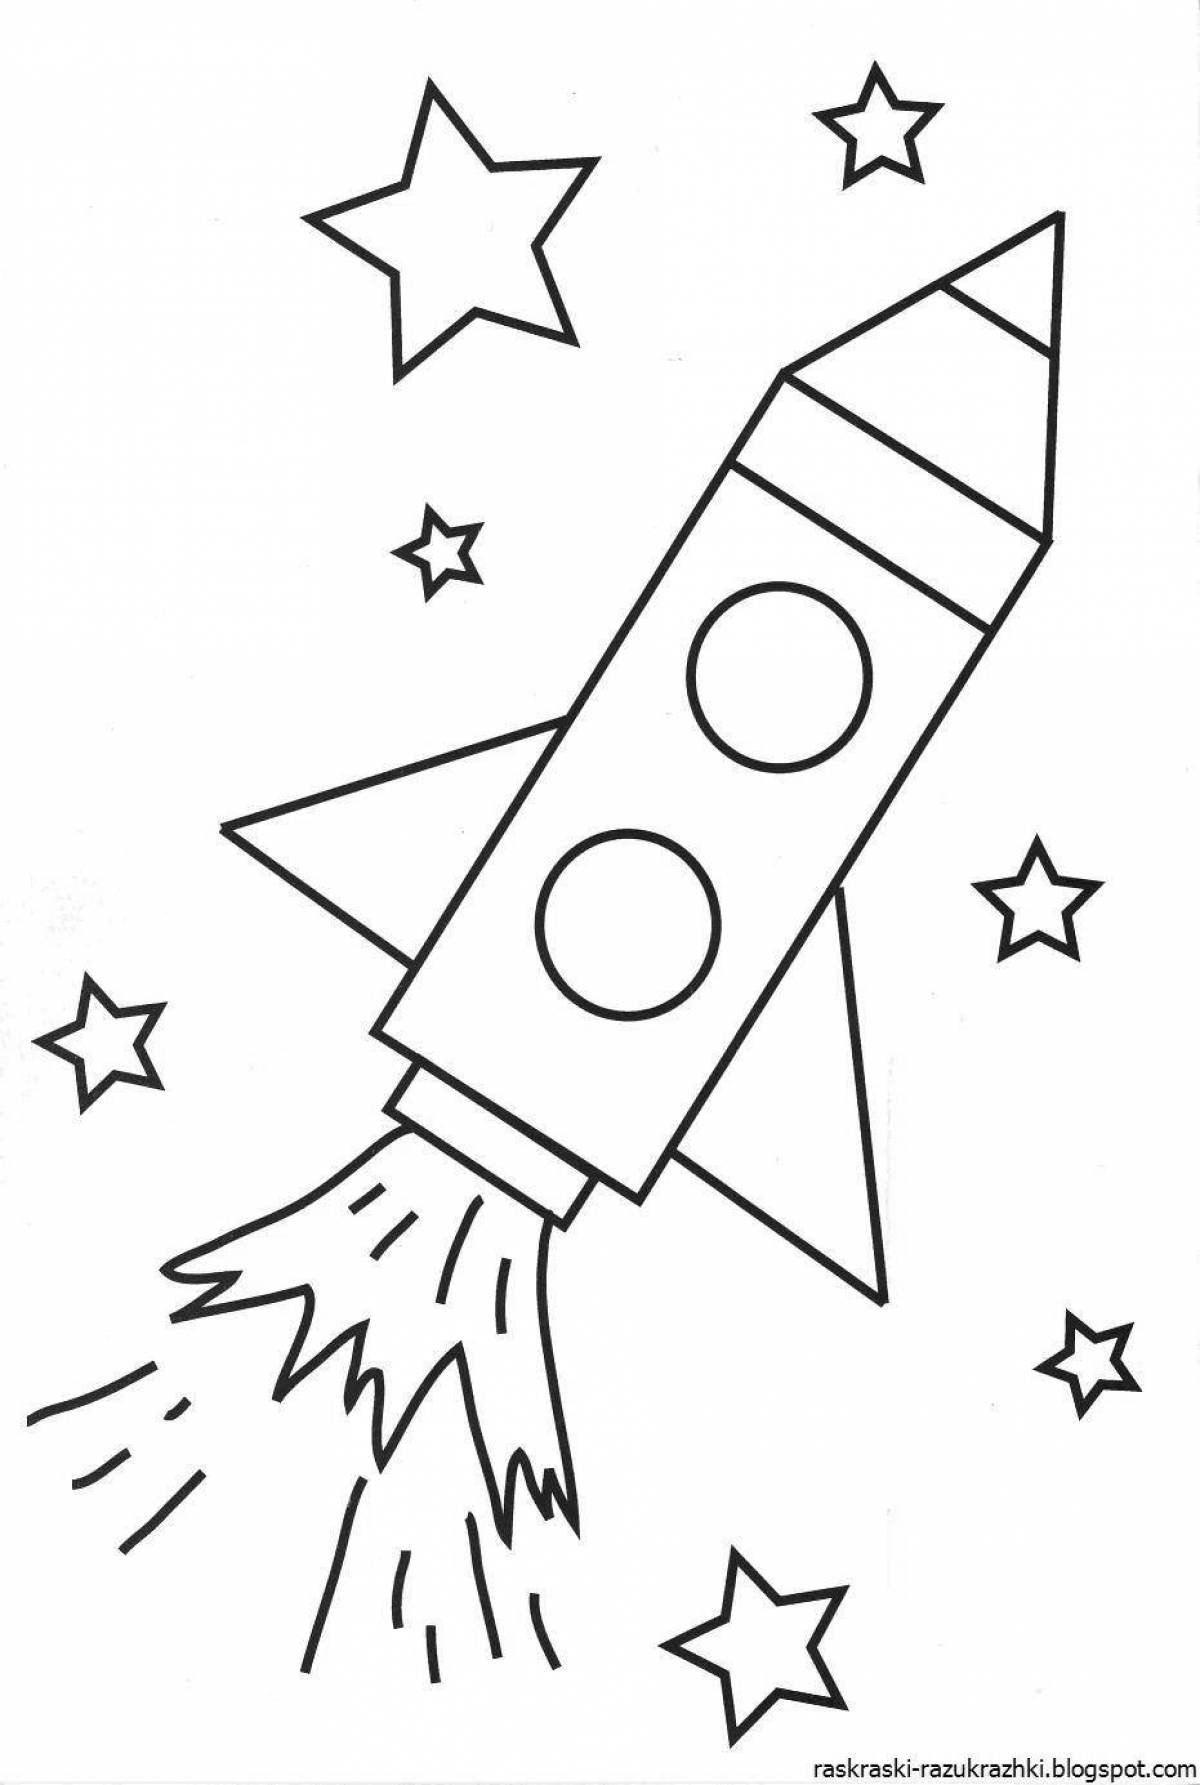 Rocket coloring page with colorful splashes for children 4-5 years old